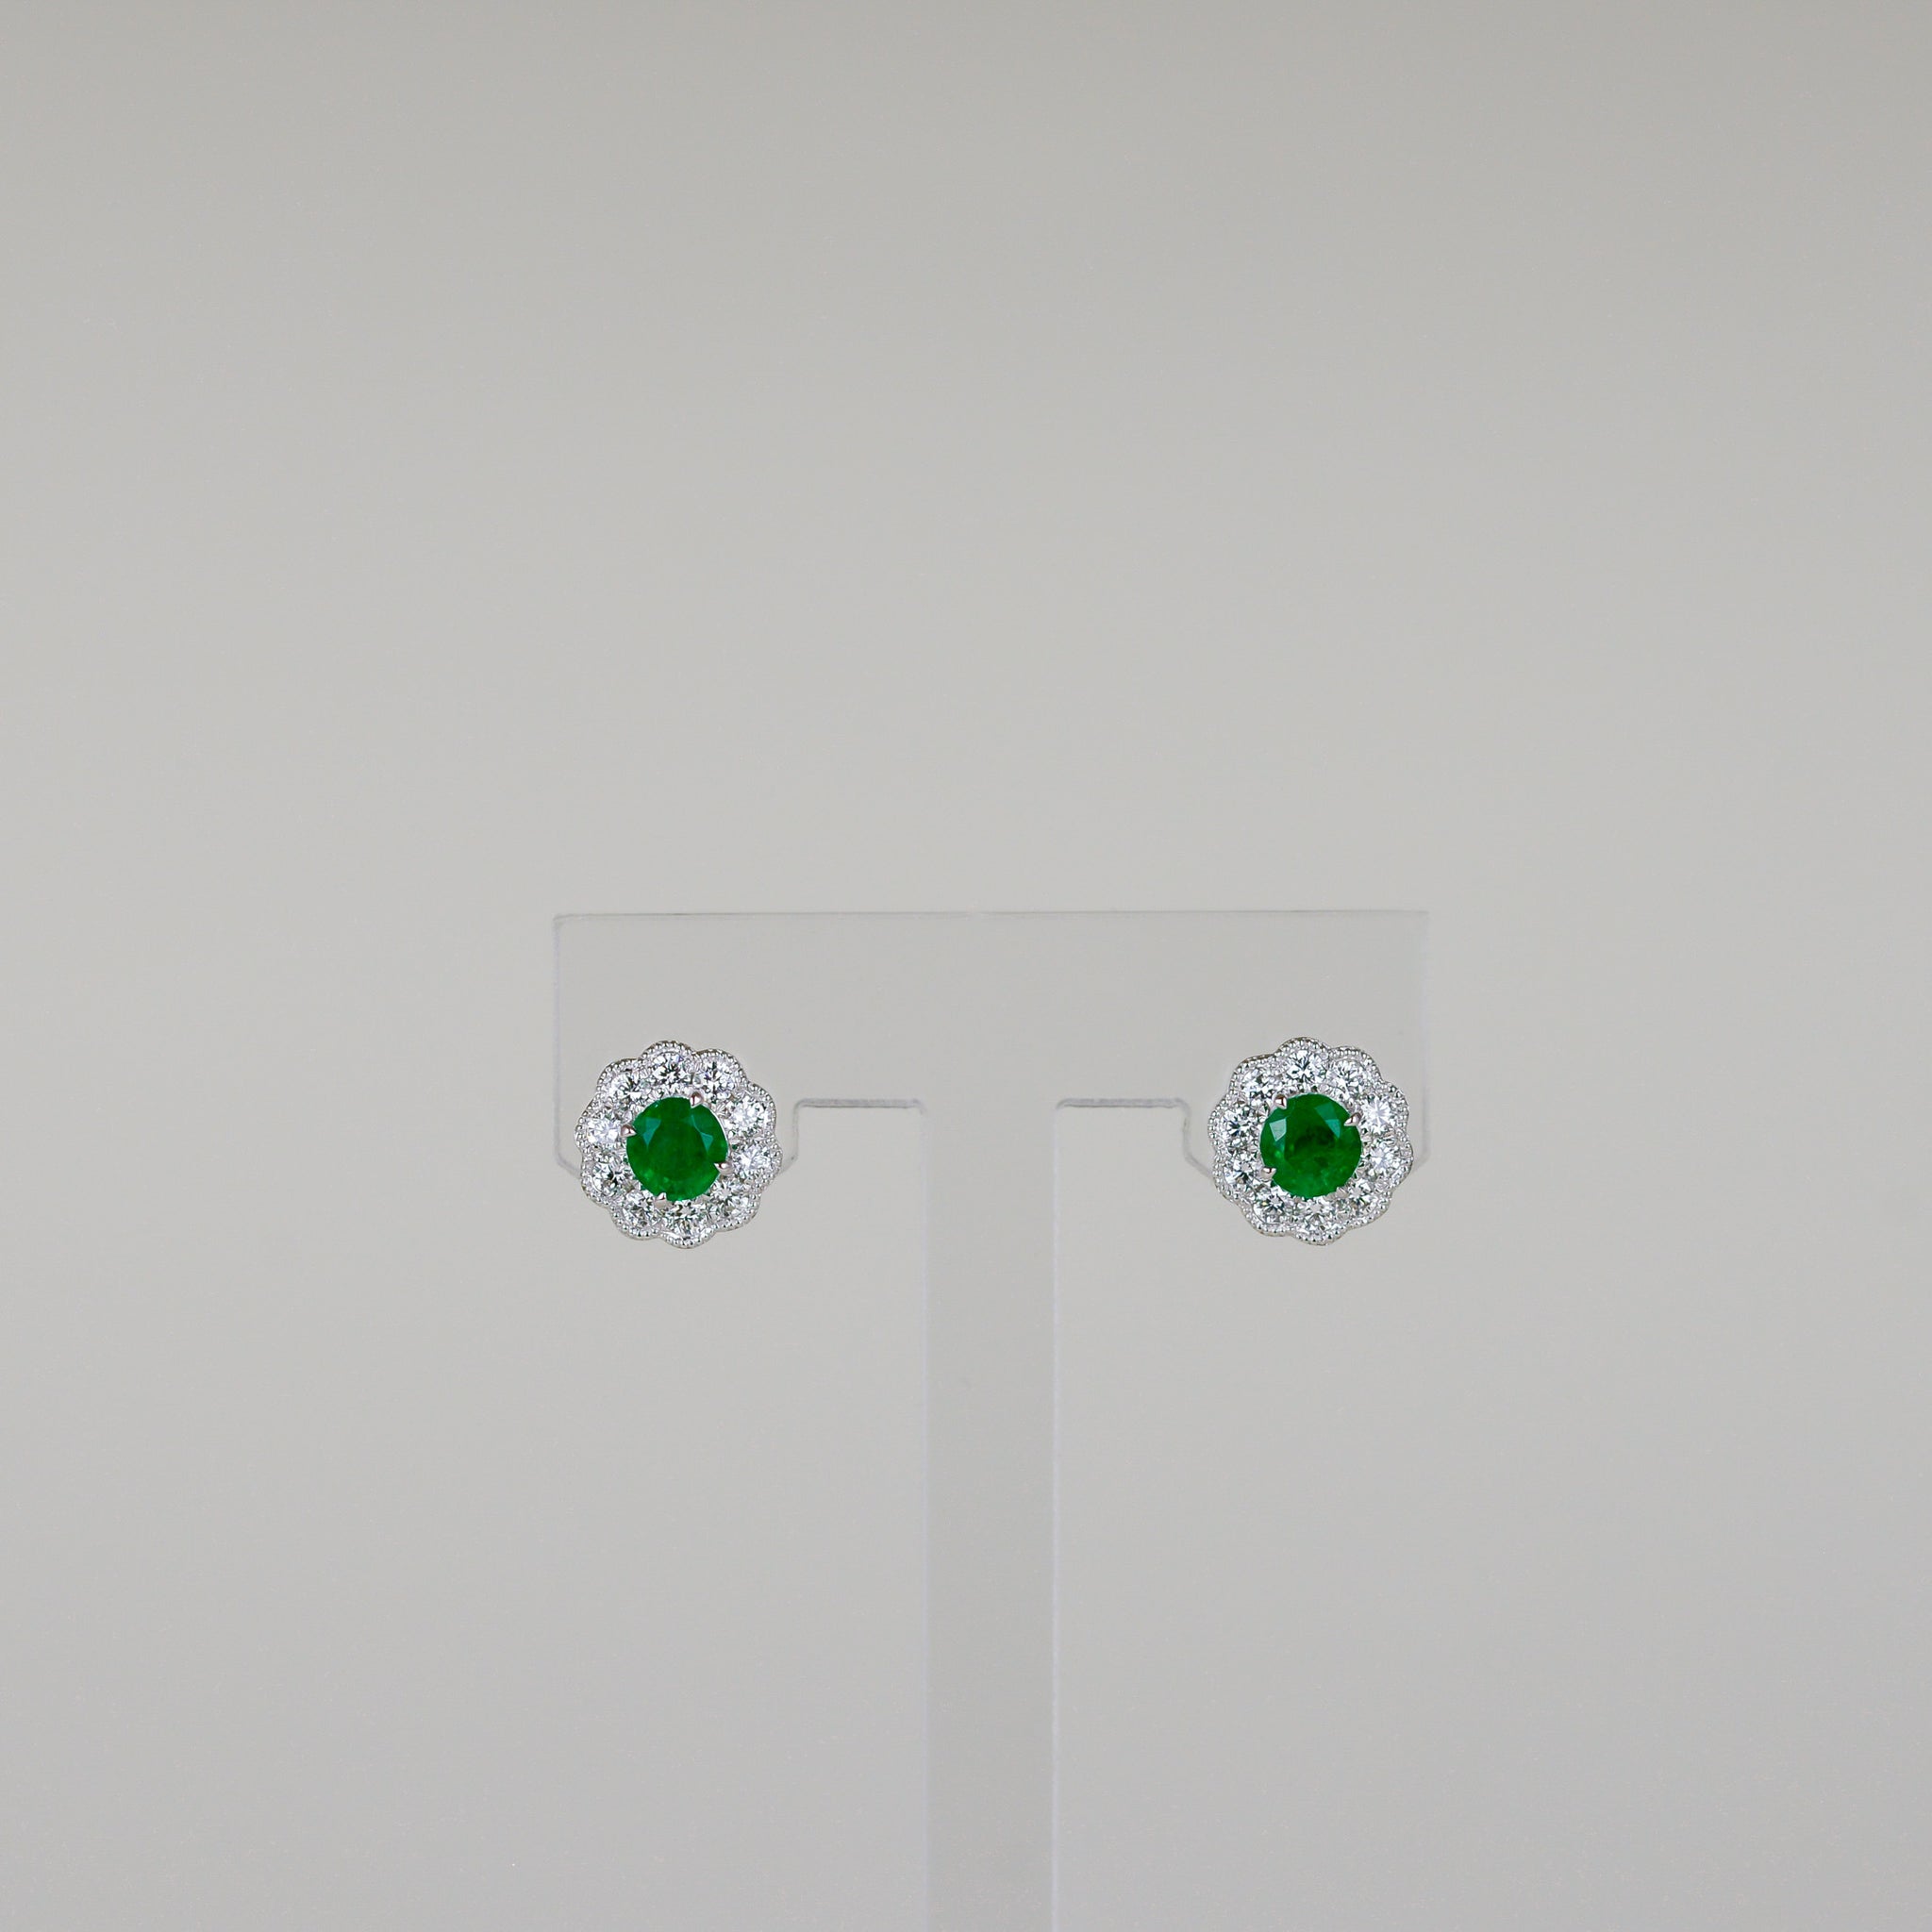 18ct White Gold 0.49ct Round Emerald and Diamond Stud Earring